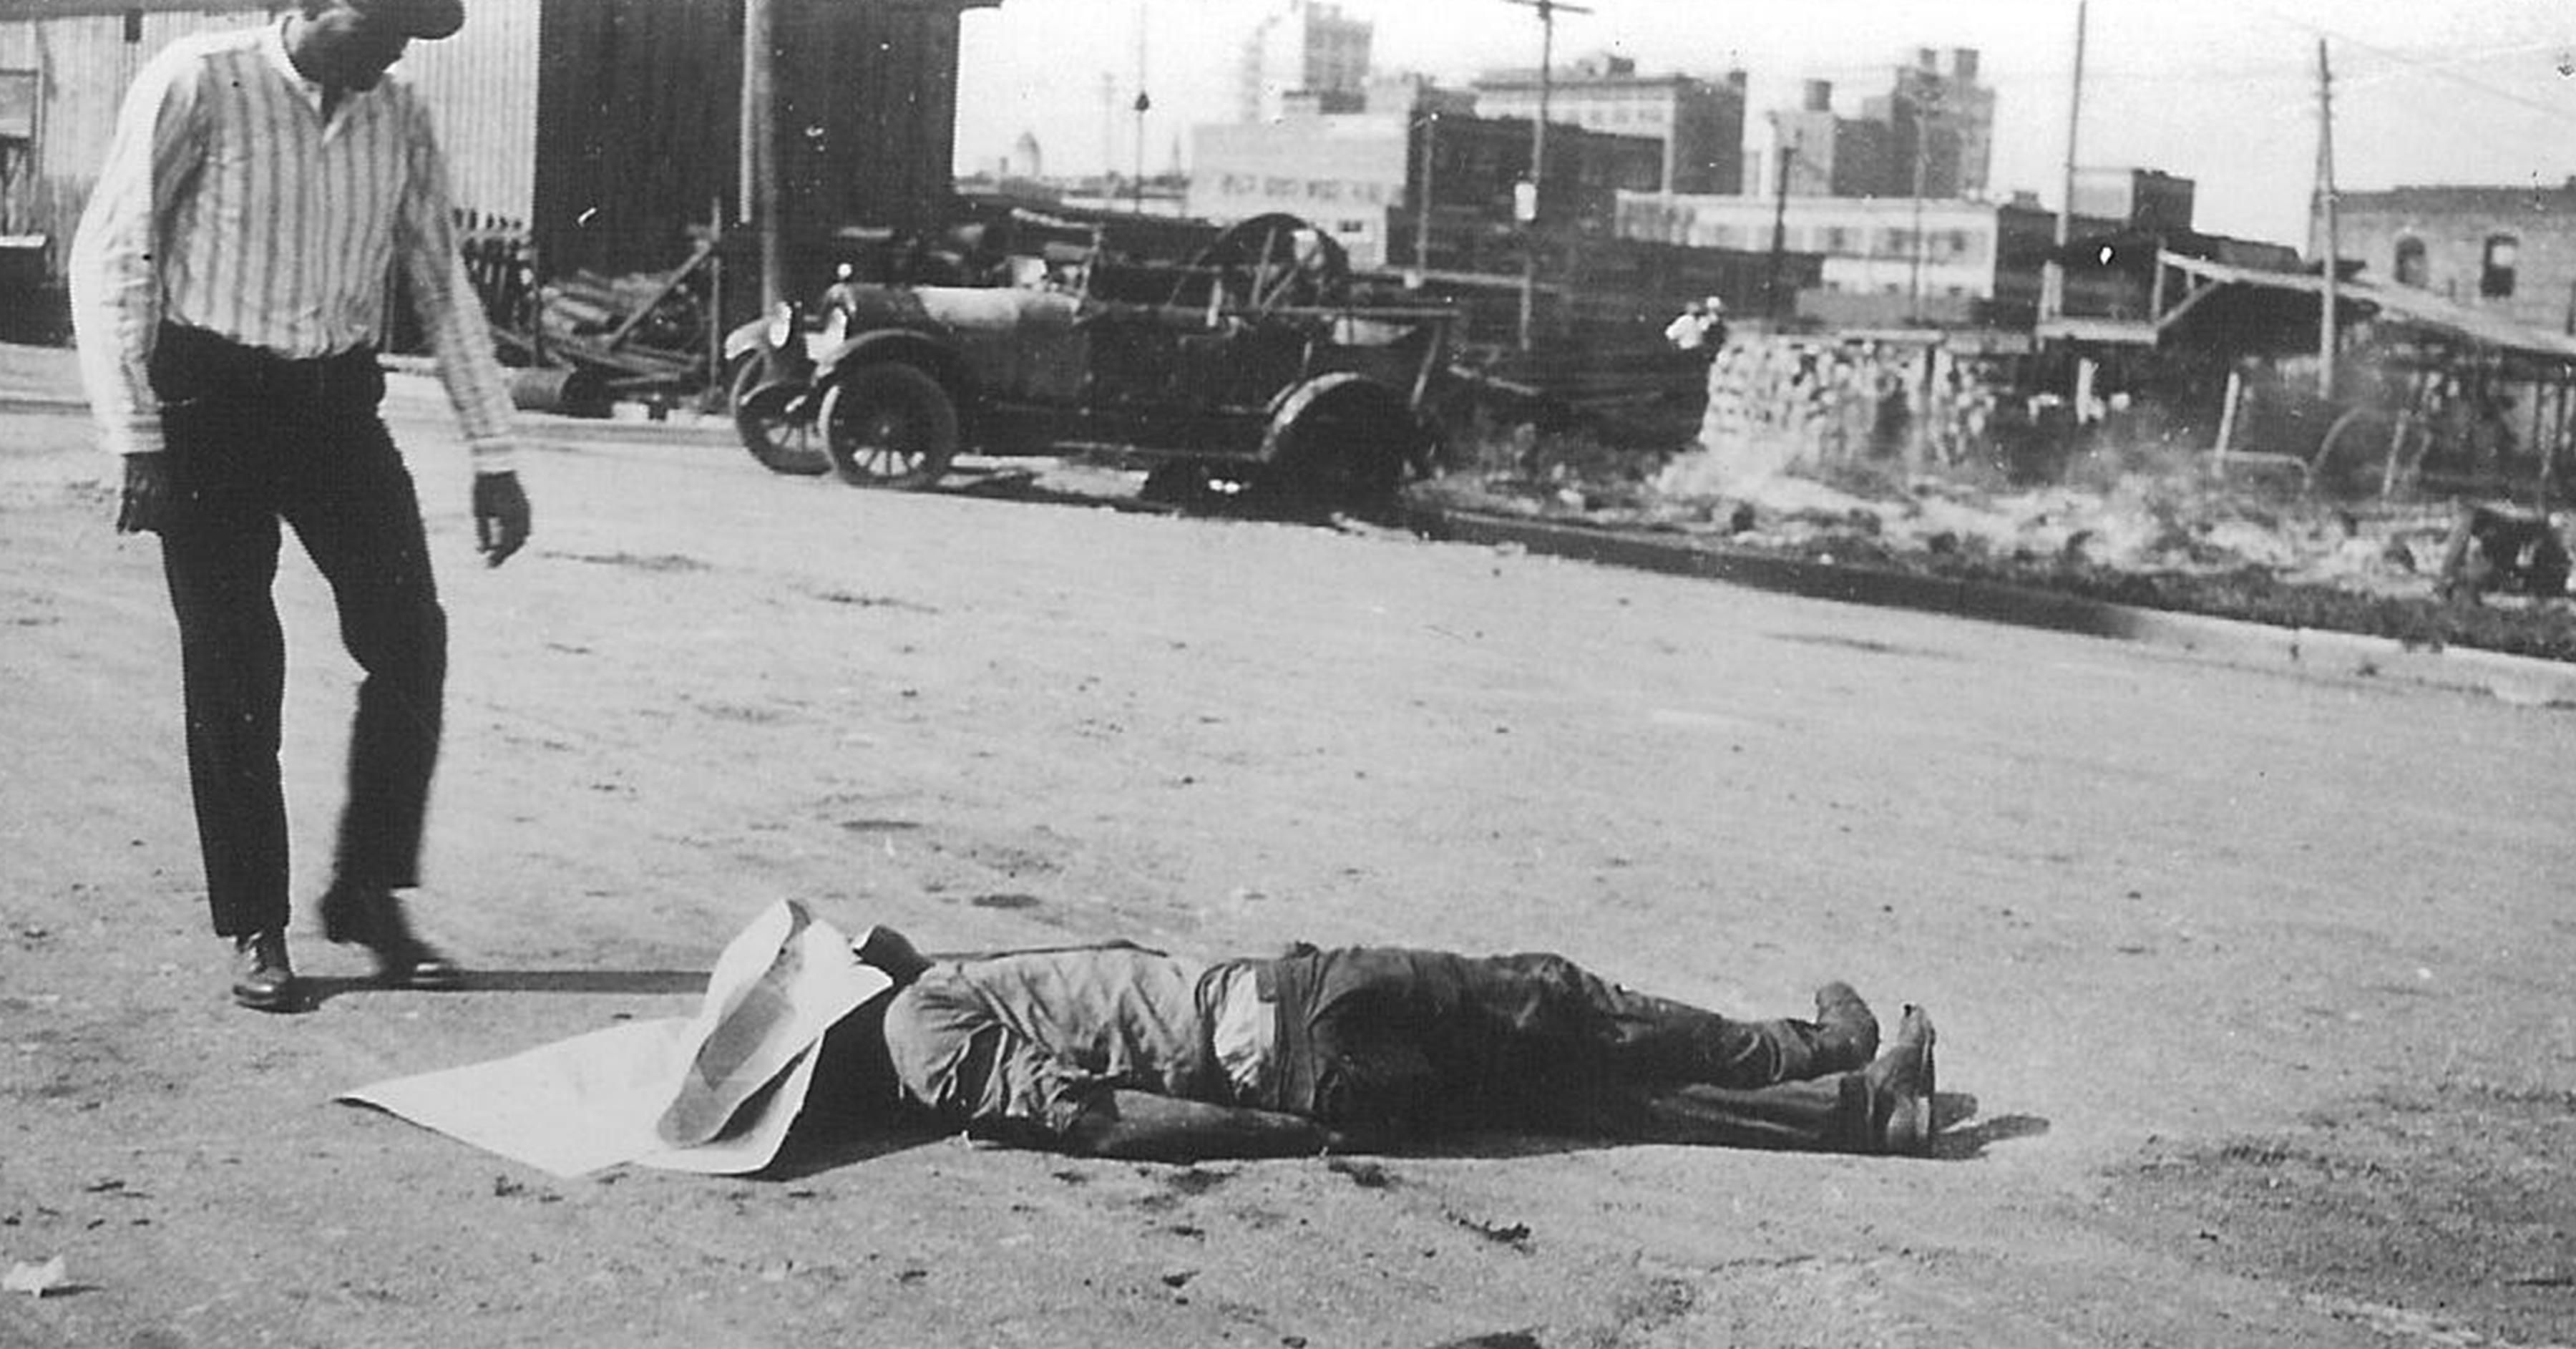 The body of an unidentified black victim of the Tulsa Race Massacre lies in the street as a white man stands over him, Tulsa, Oklahoma, June 1, 1921. (Photo: Greenwood Cultural Center/Getty Images)